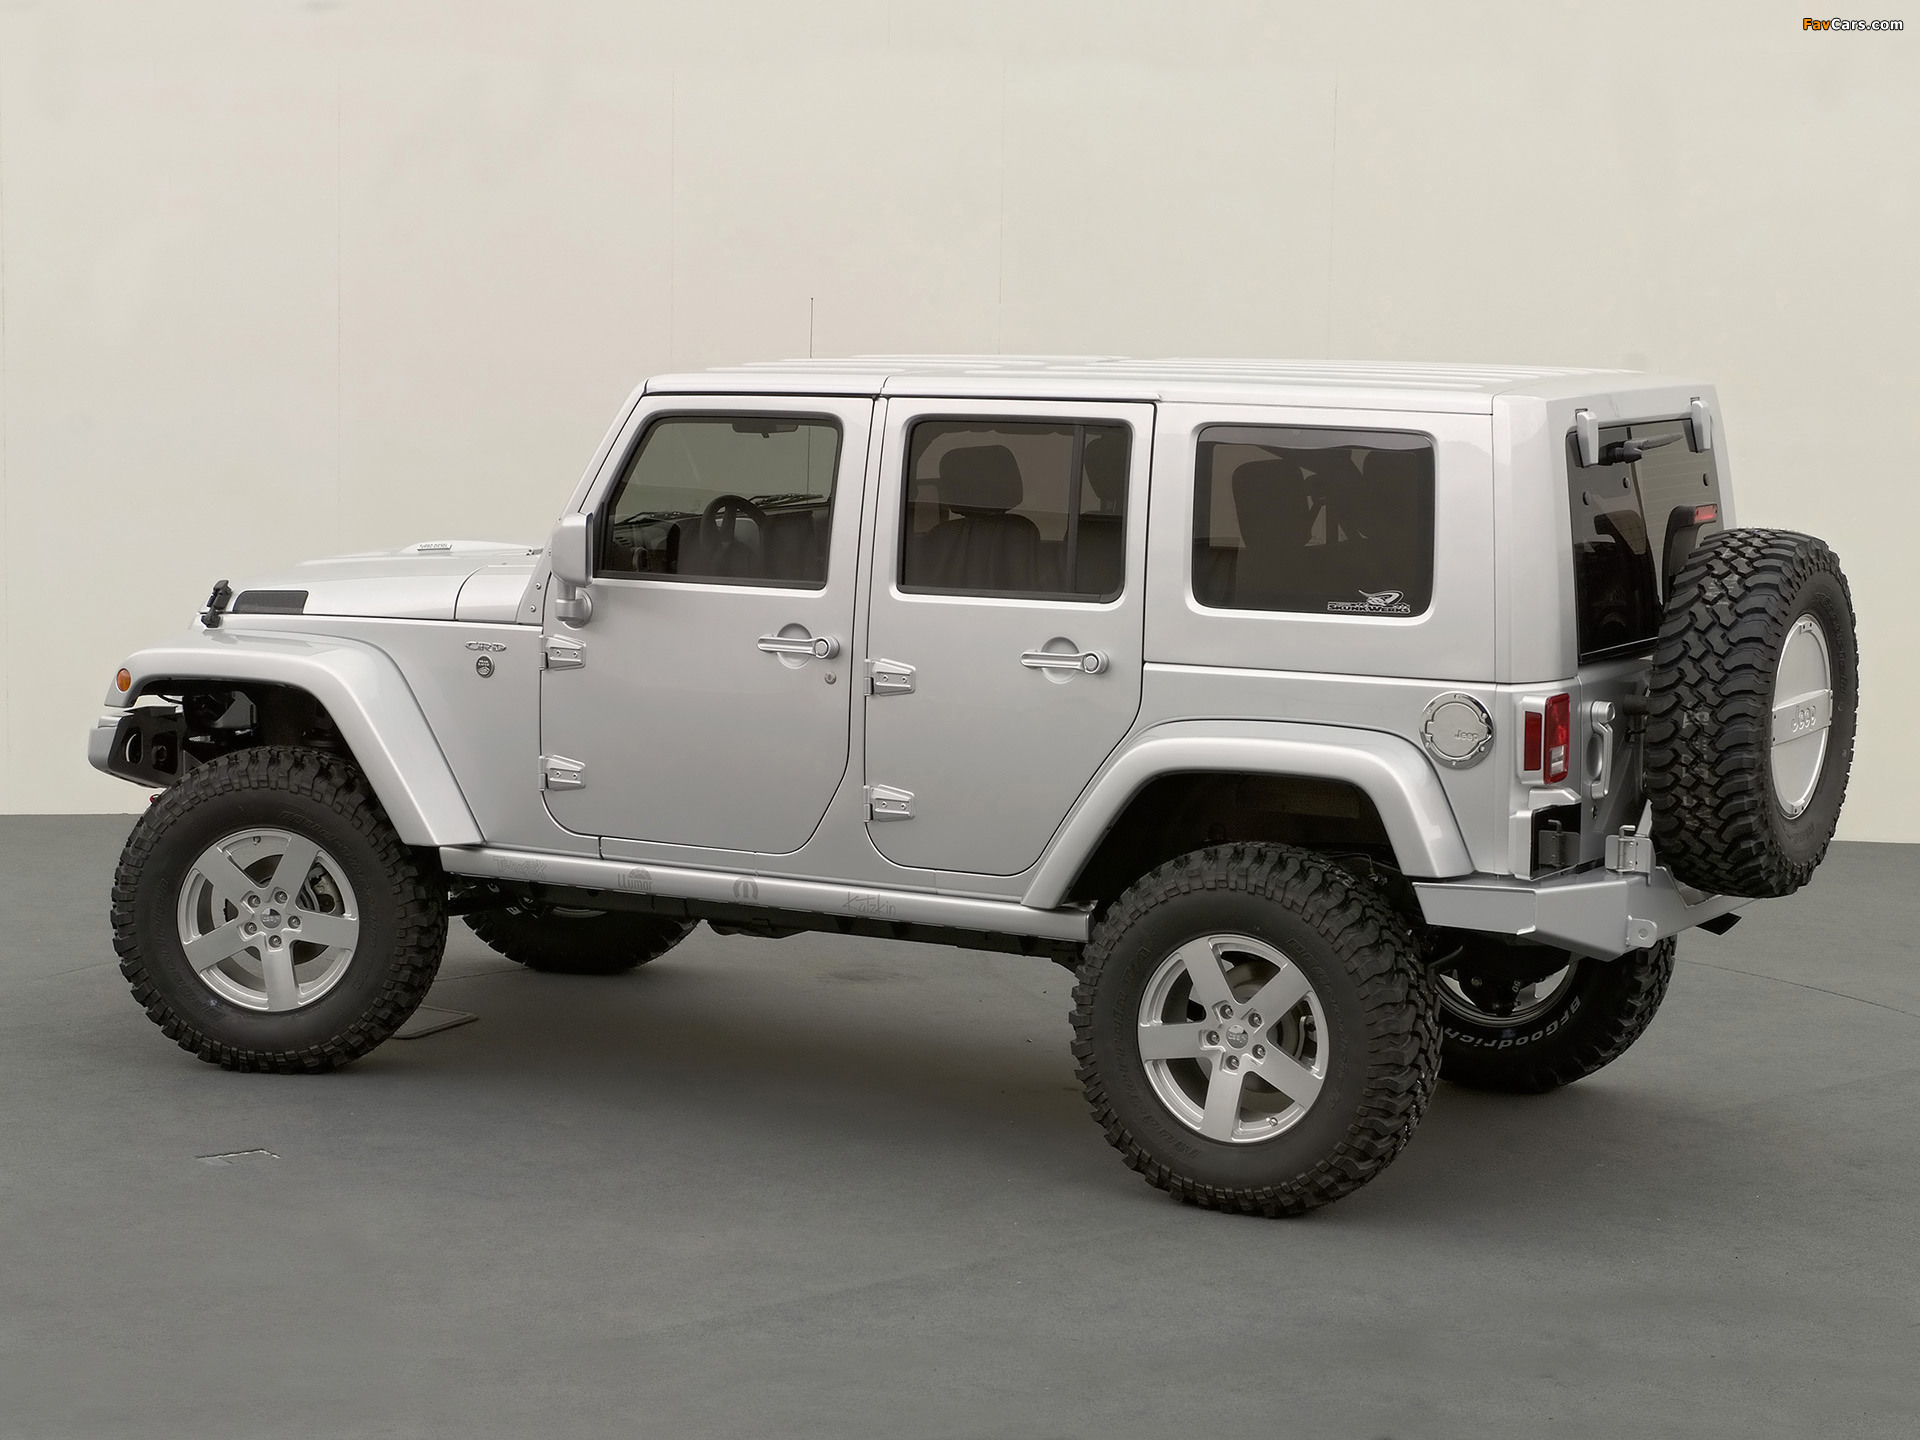 Jeep Wrangler Unlimited Rubicon Concept (JK) 2006 wallpapers (1920 x 1440)